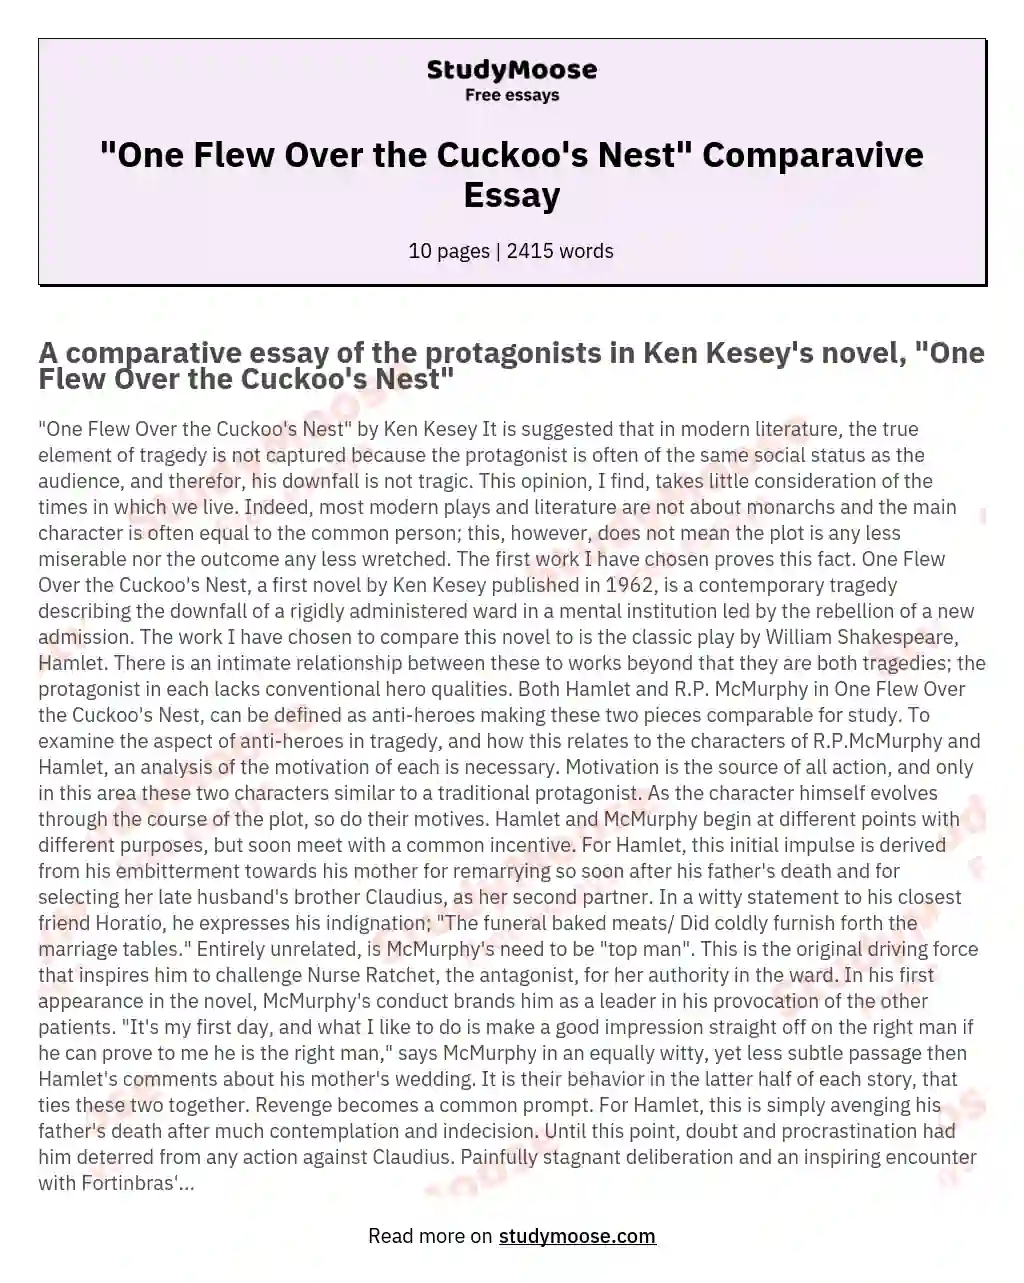 "One Flew Over the Cuckoo's Nest" Comparavive Essay essay